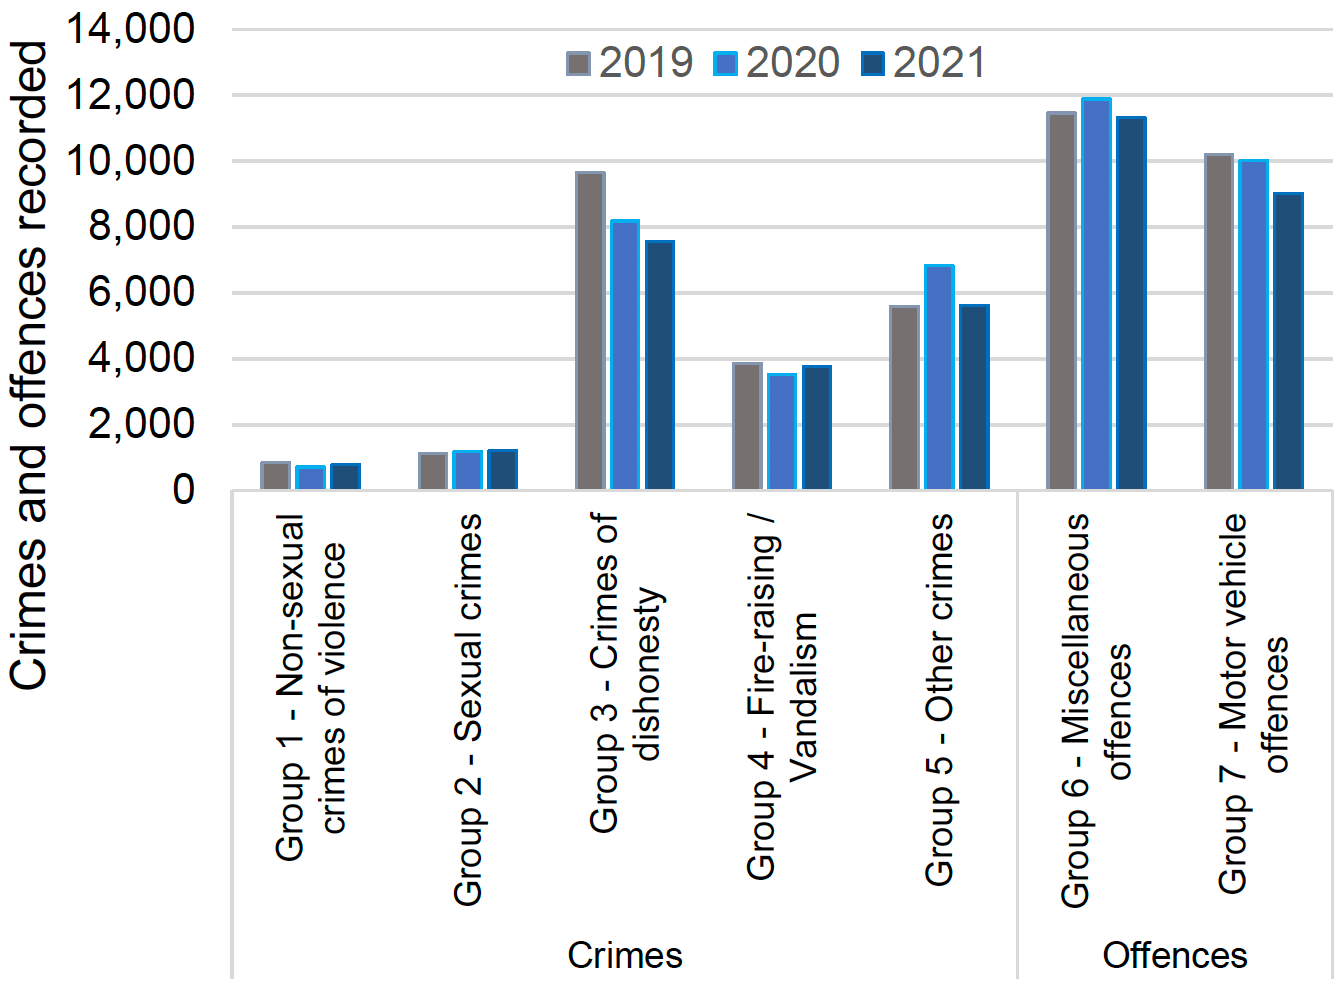 Chart summarises counts of crimes and offences by group for June 2019, 2020, and 2021. The same information is presented across Tables 1 and 2